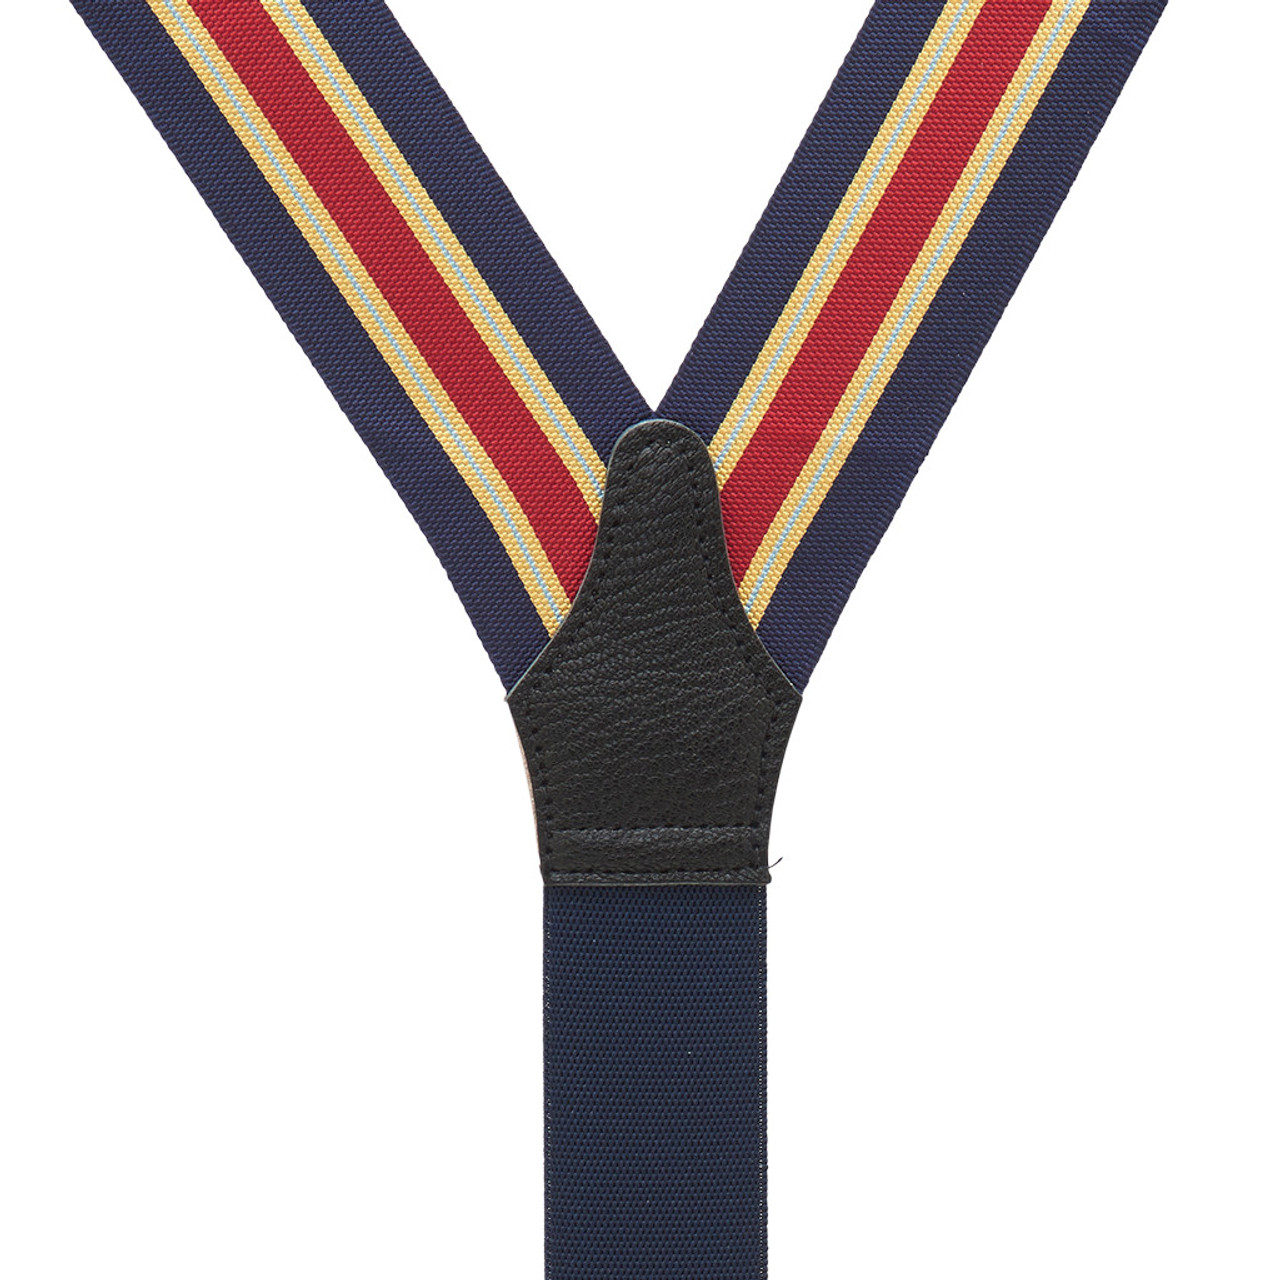 YELLOW/NAVY Variable Stripes Convertible Suspenders